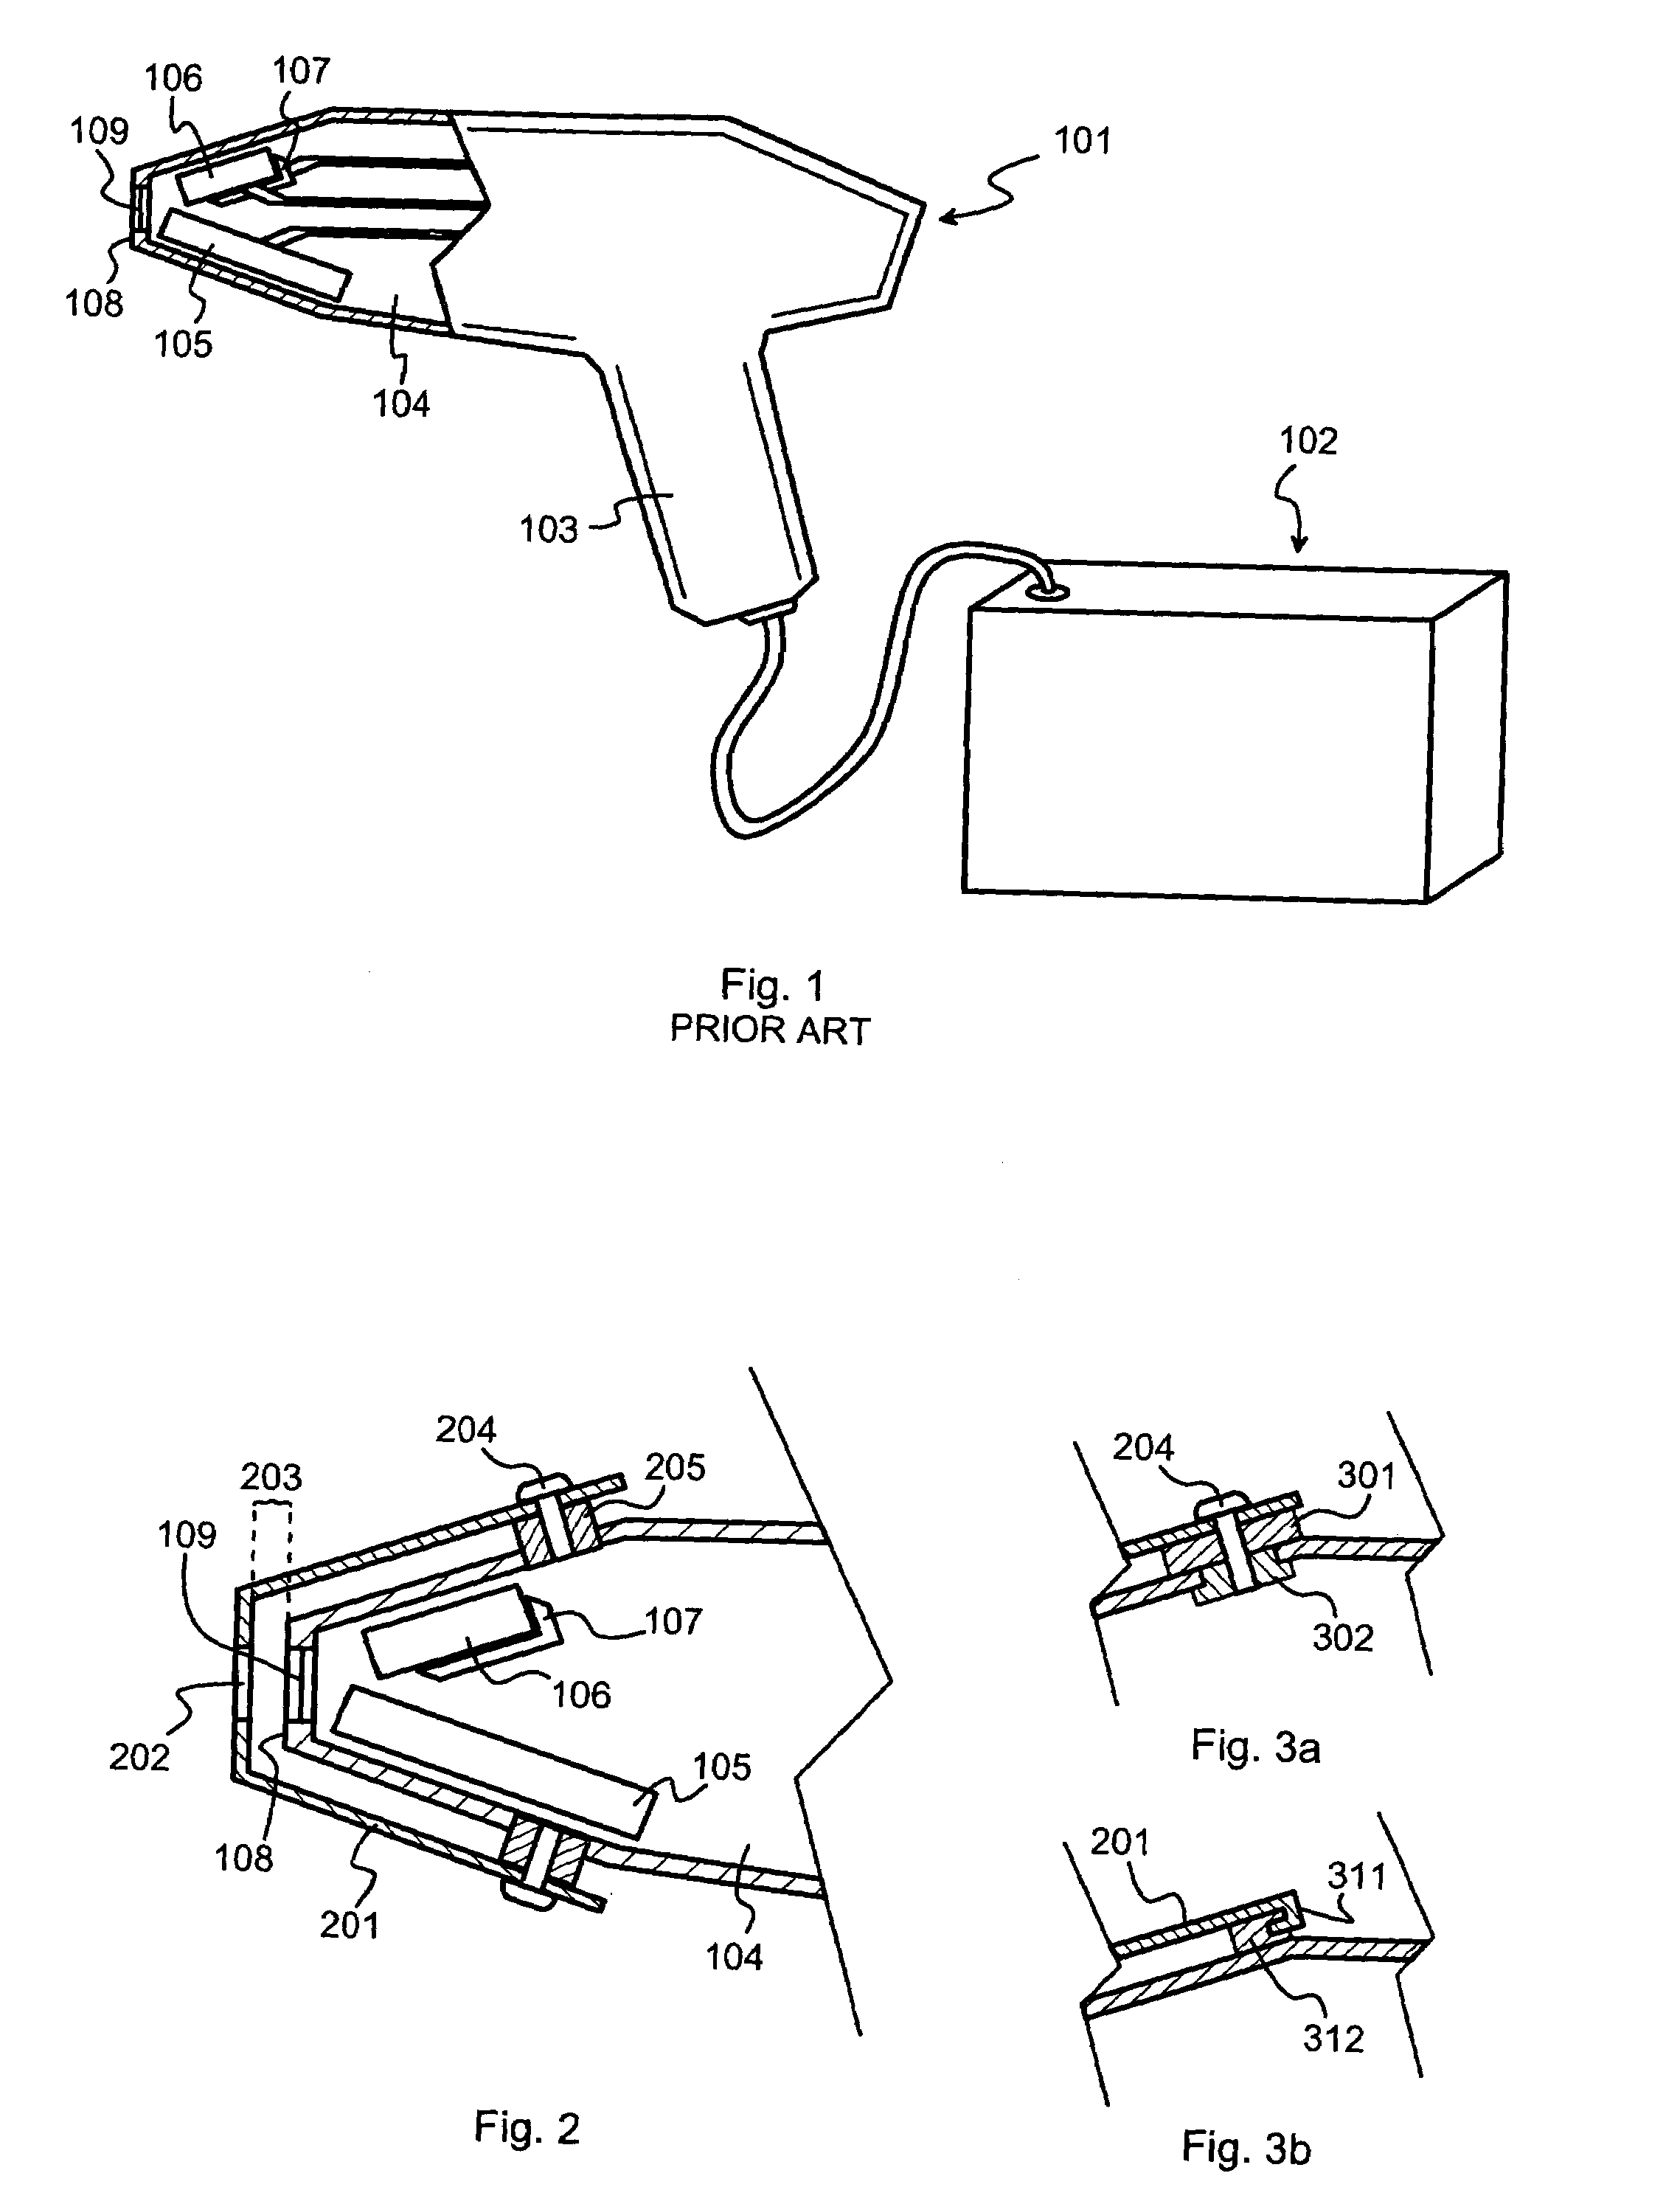 Adapter and analyzer device for performing X-ray fluorescence analysis on hot surfaces